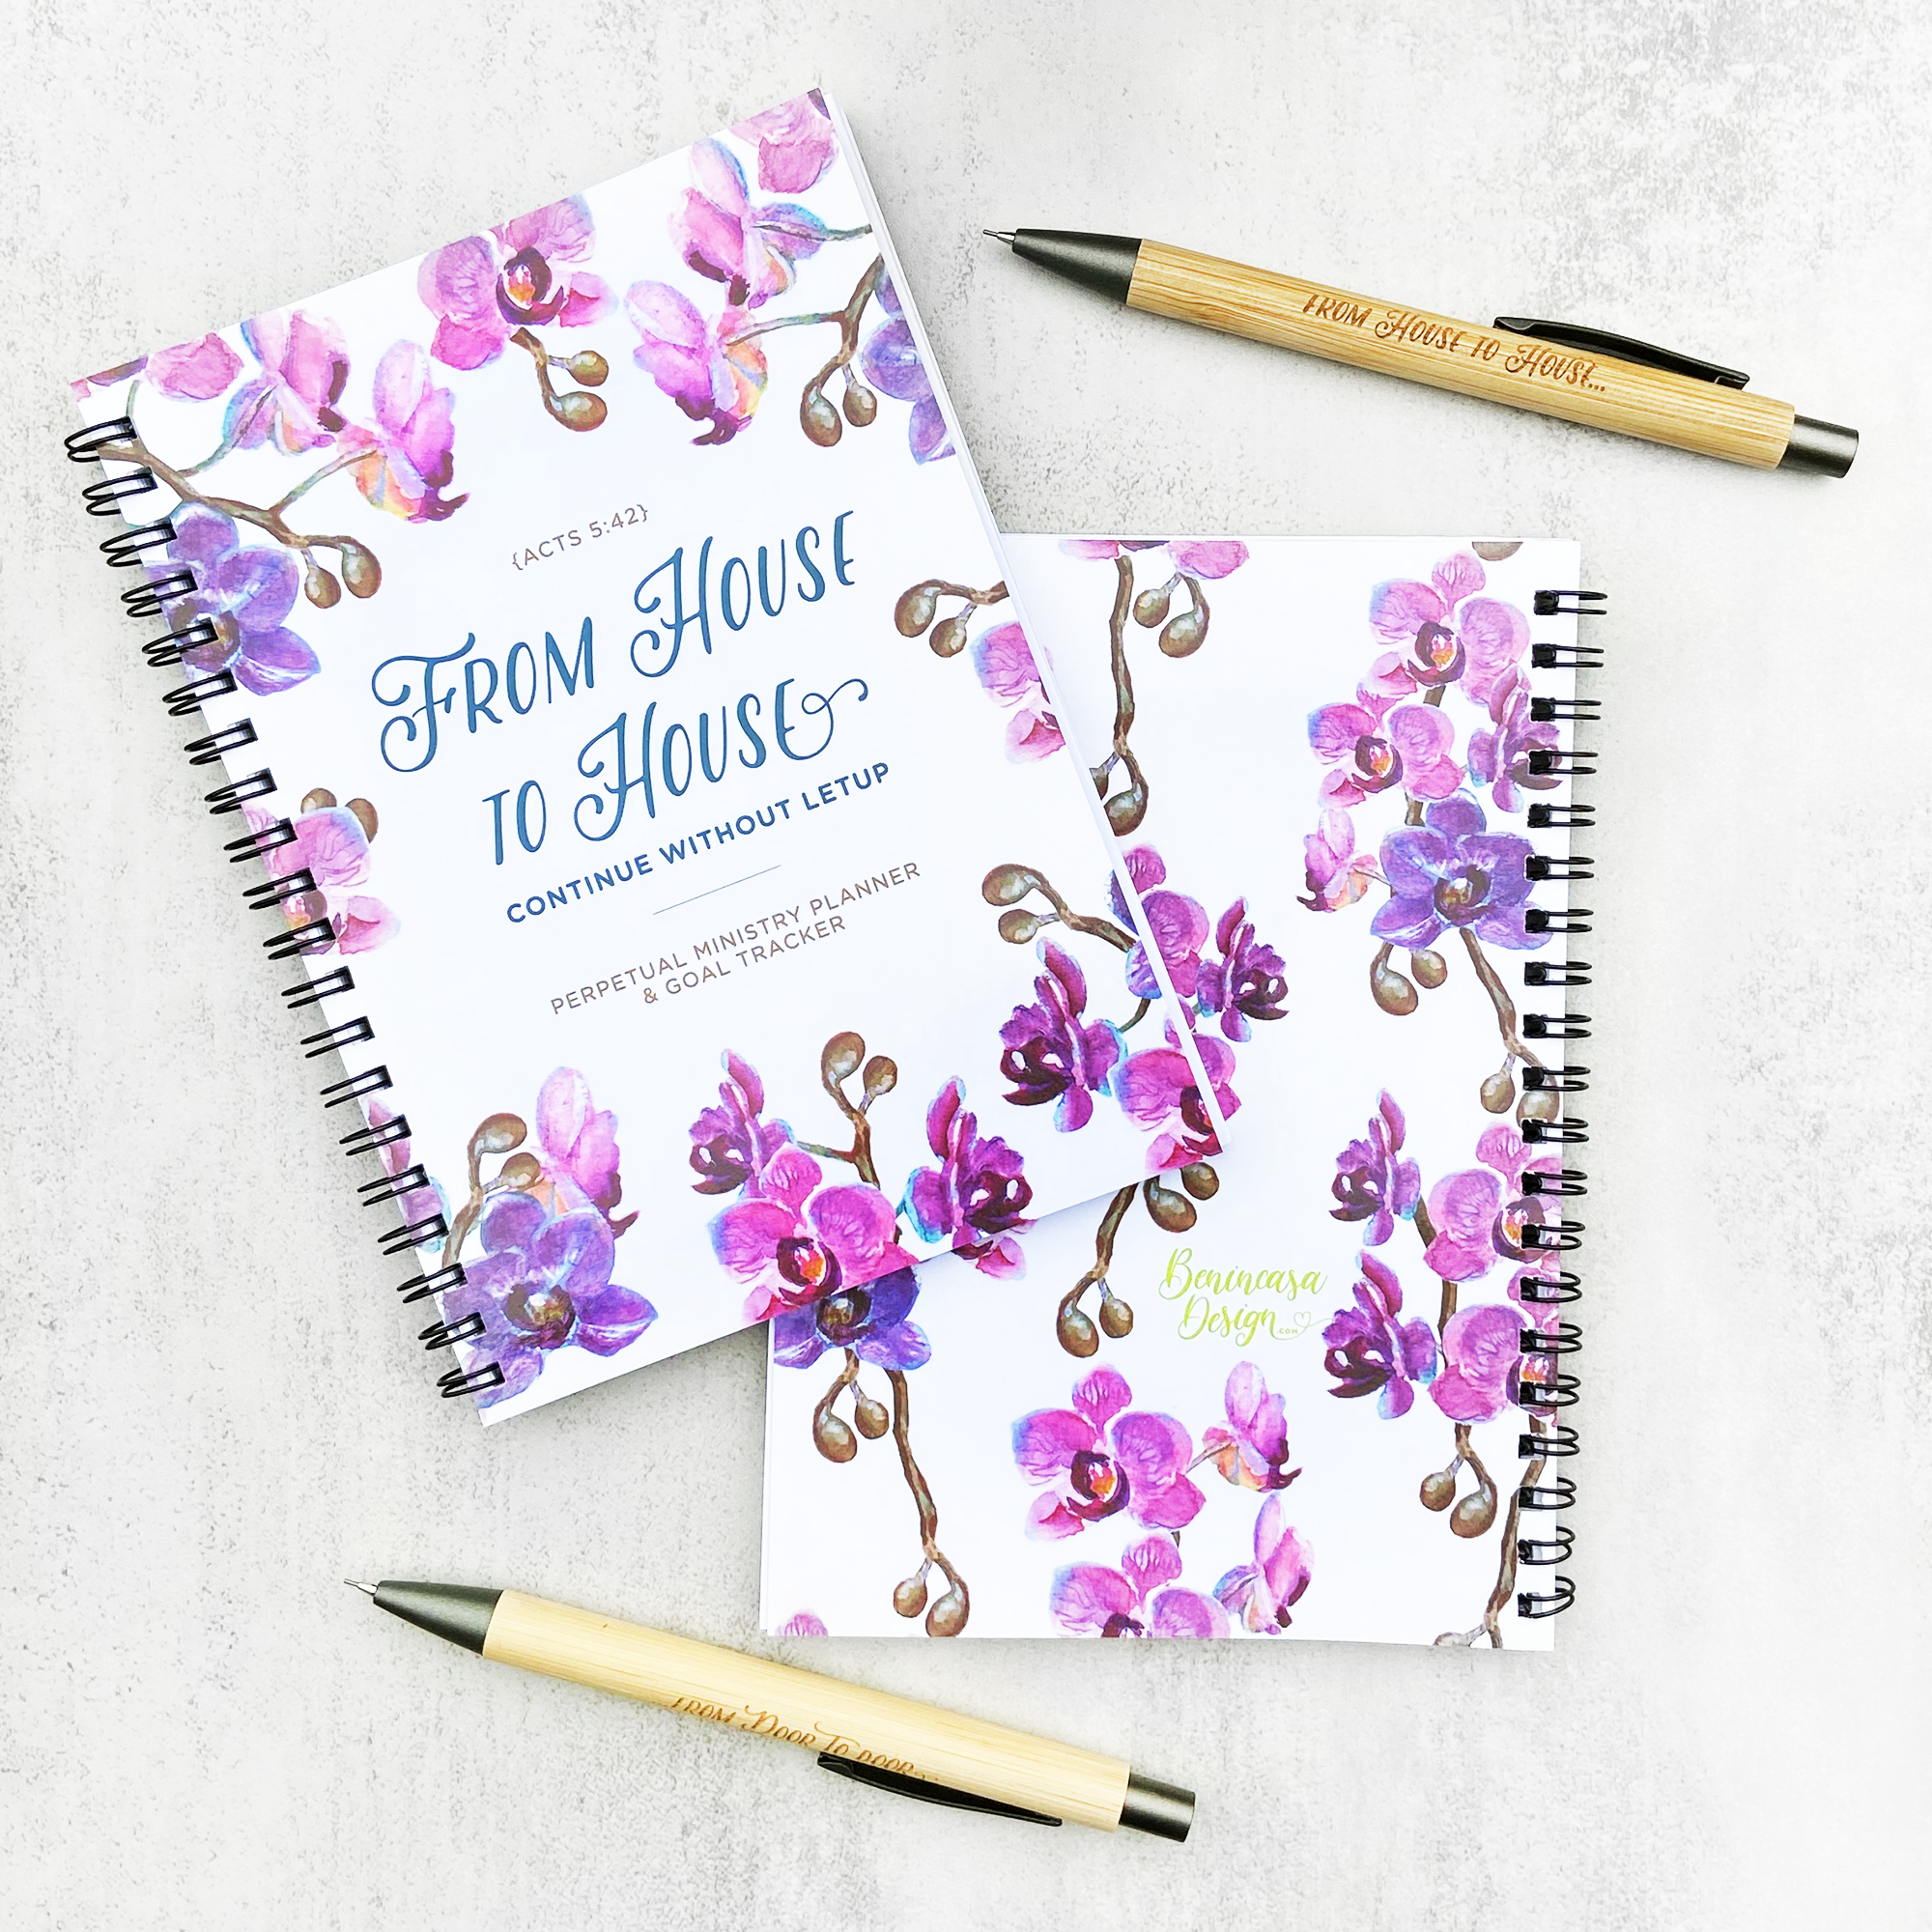 Perpetual Ministry Planner & Goal Tracker – Extended Pocket Edition (Orchids)